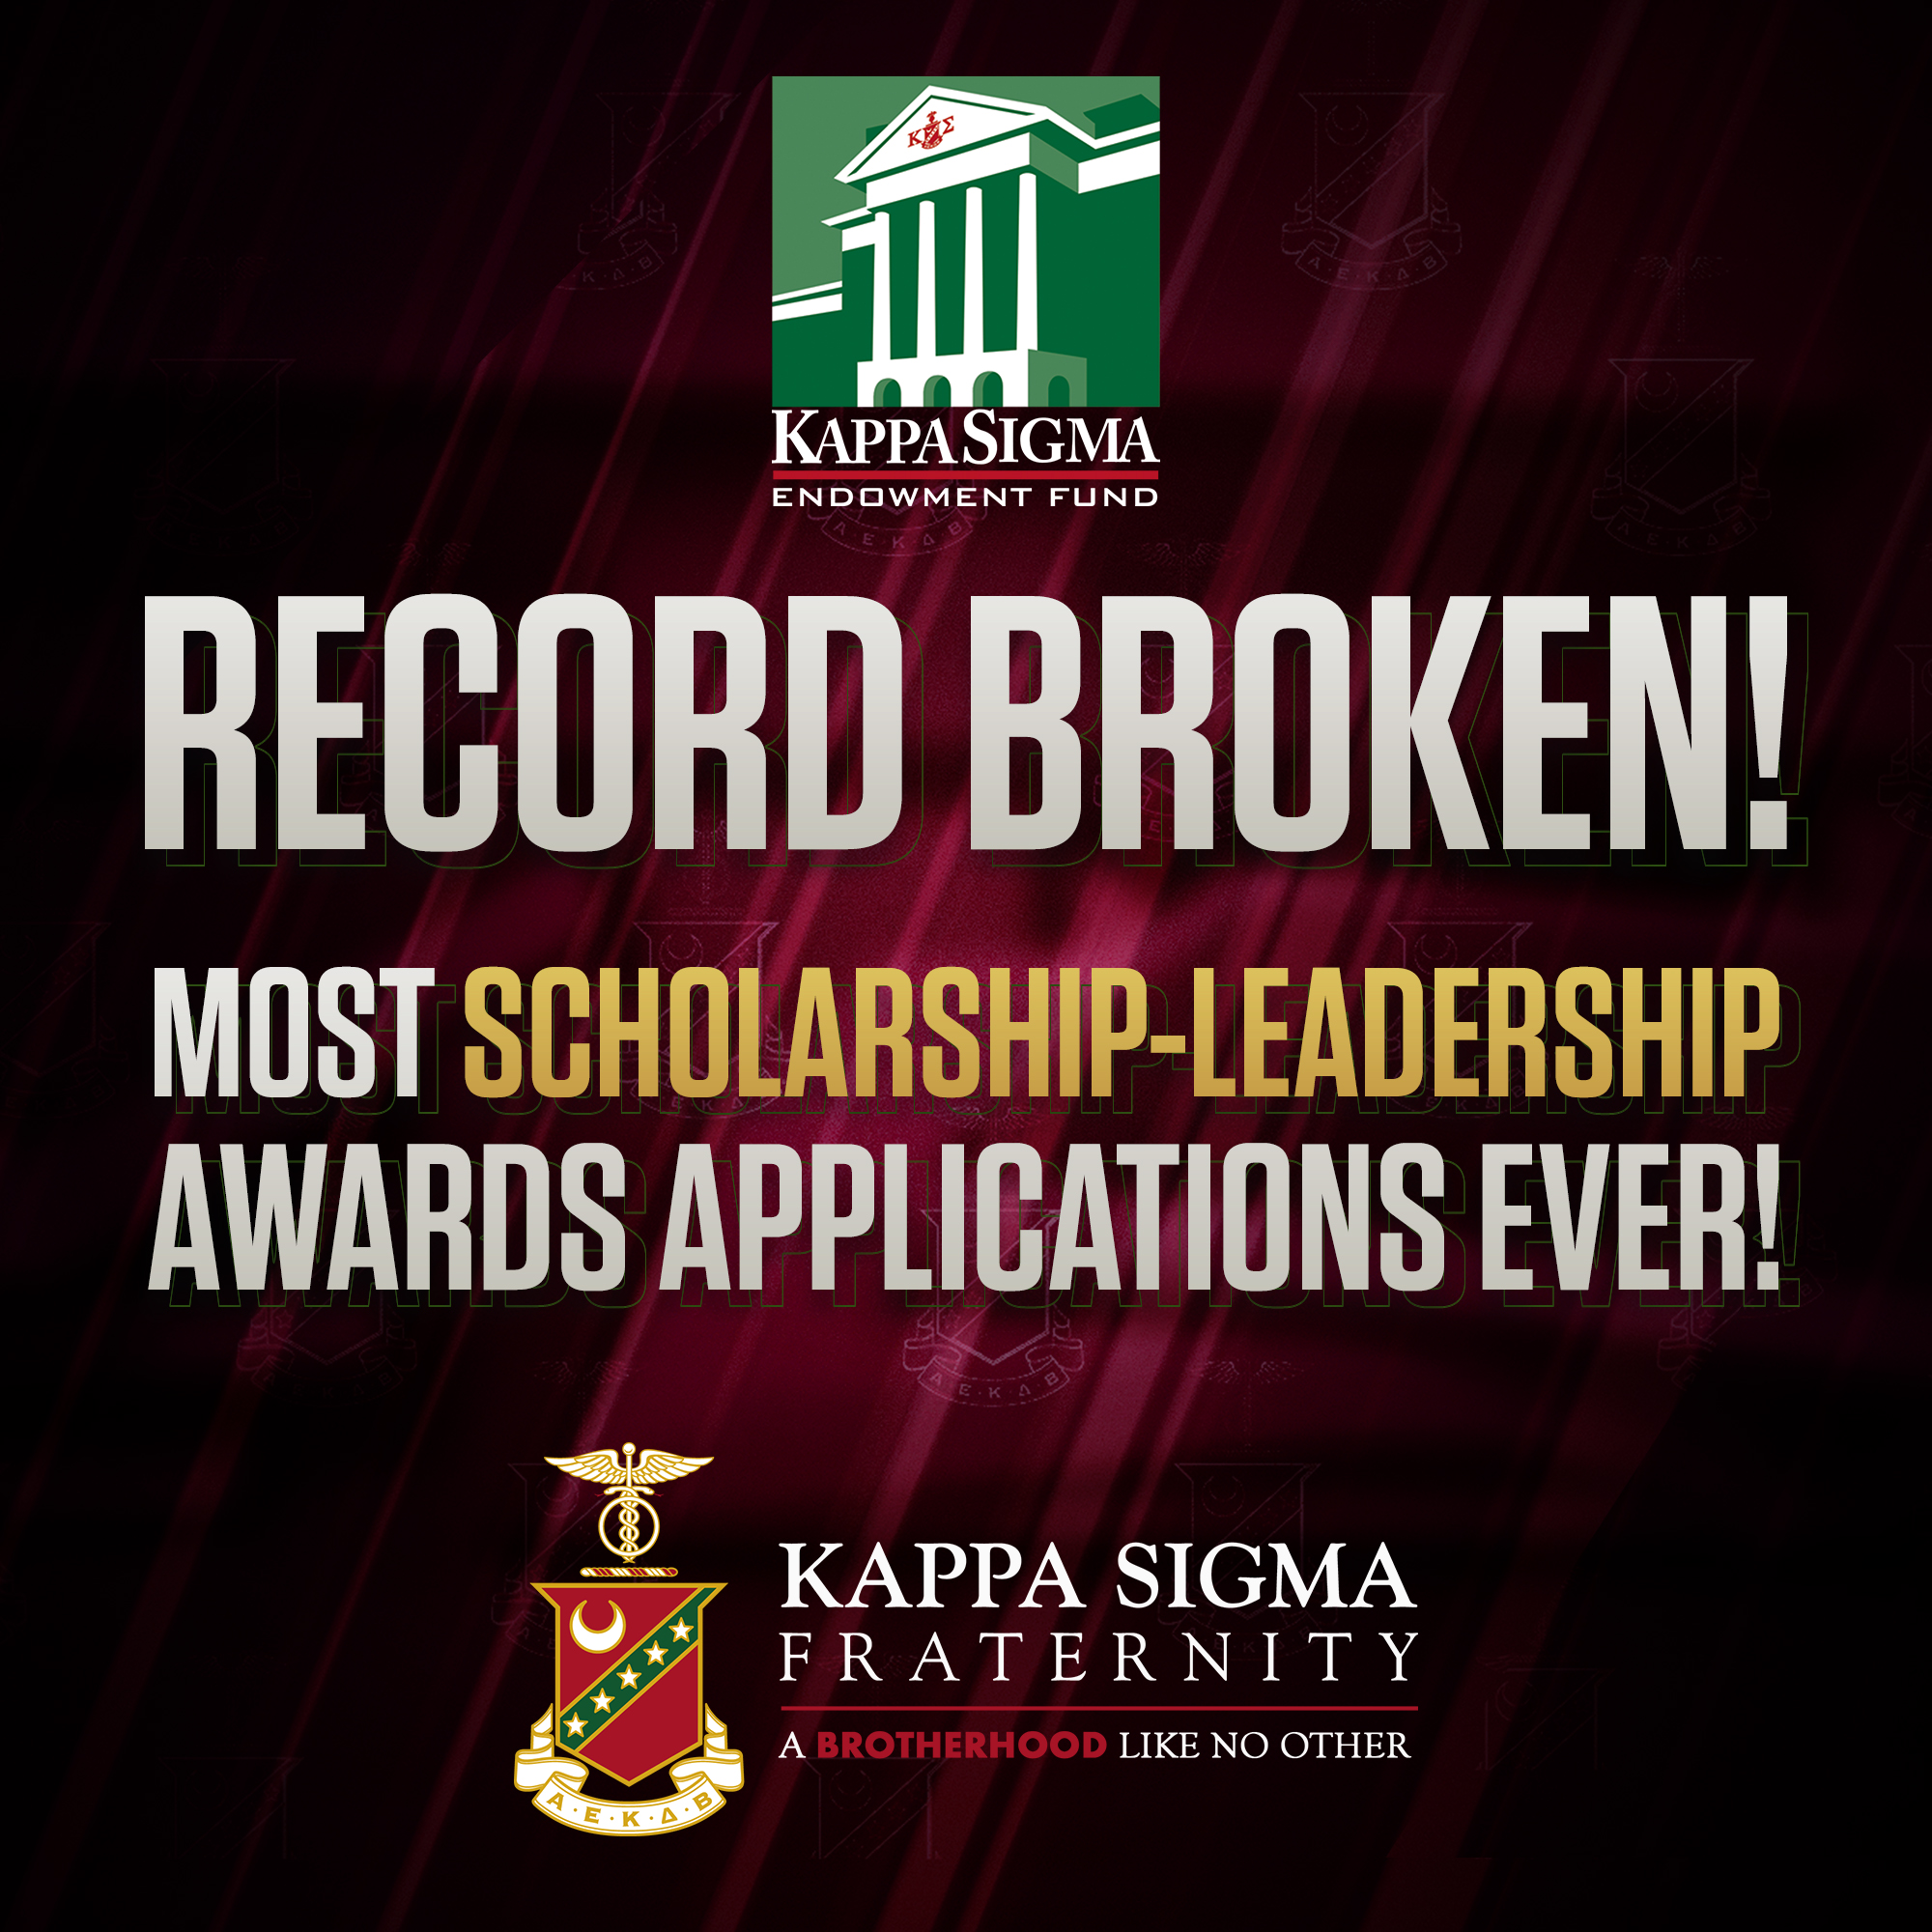 Kerel barst efficiënt Kappa Sigma on Twitter: "🚨🚨 RECORD BROKEN! 🚨🚨 This year, the Kappa  Sigma Endowment Fund received the most Scholarship-Leadership Award  applications in our 152-year history! These scholarships will help make  college more